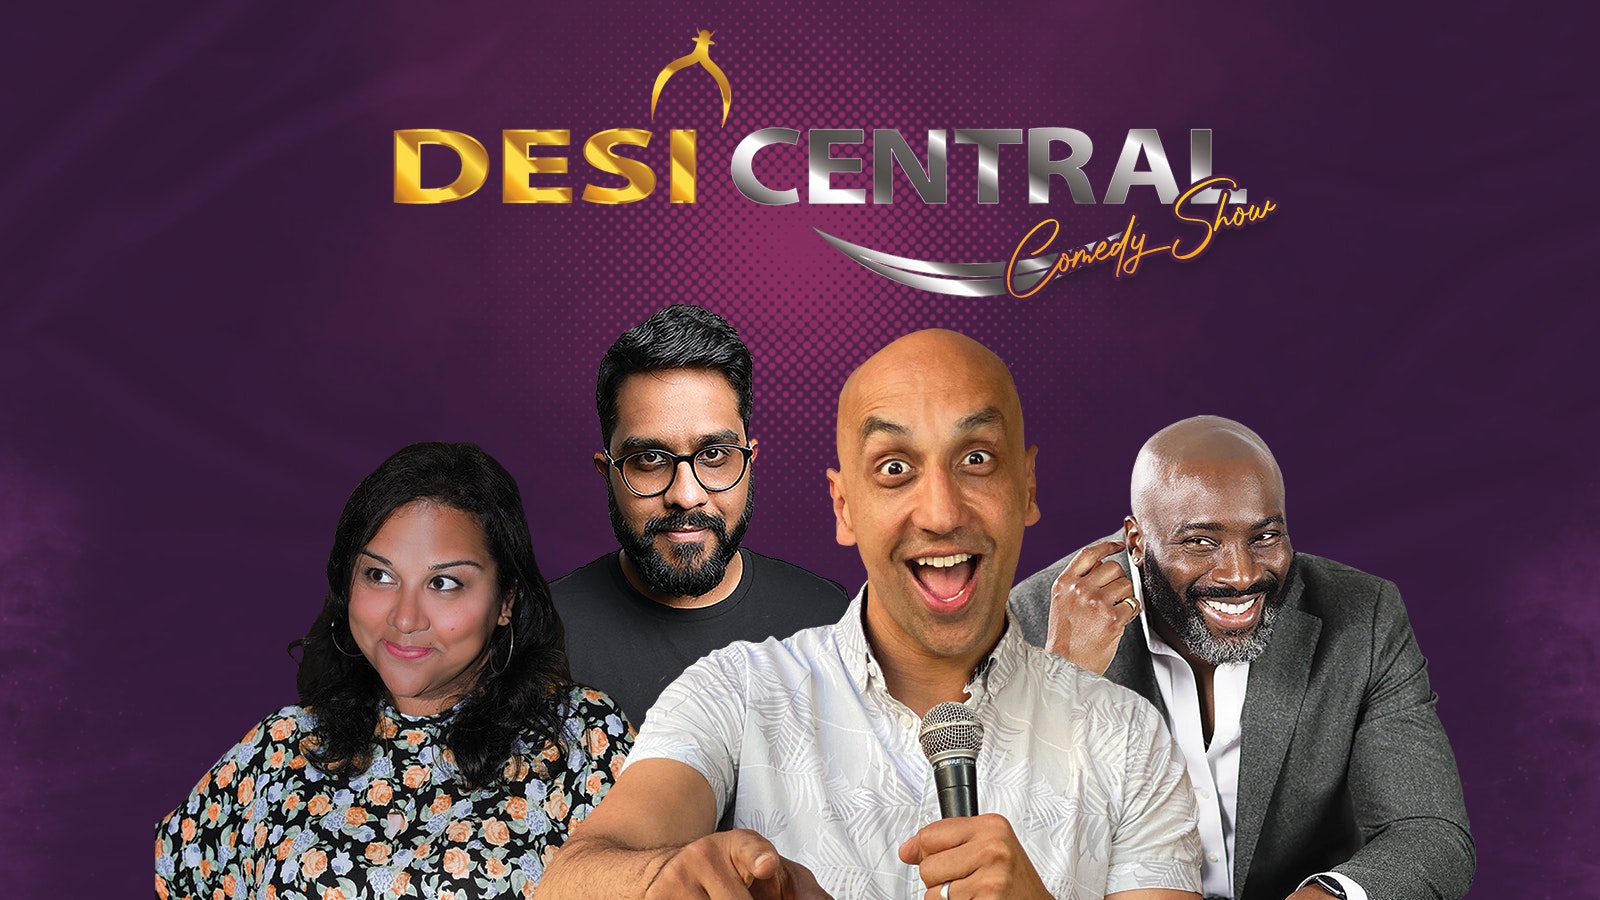 Desi Central Comedy Show – Solihull